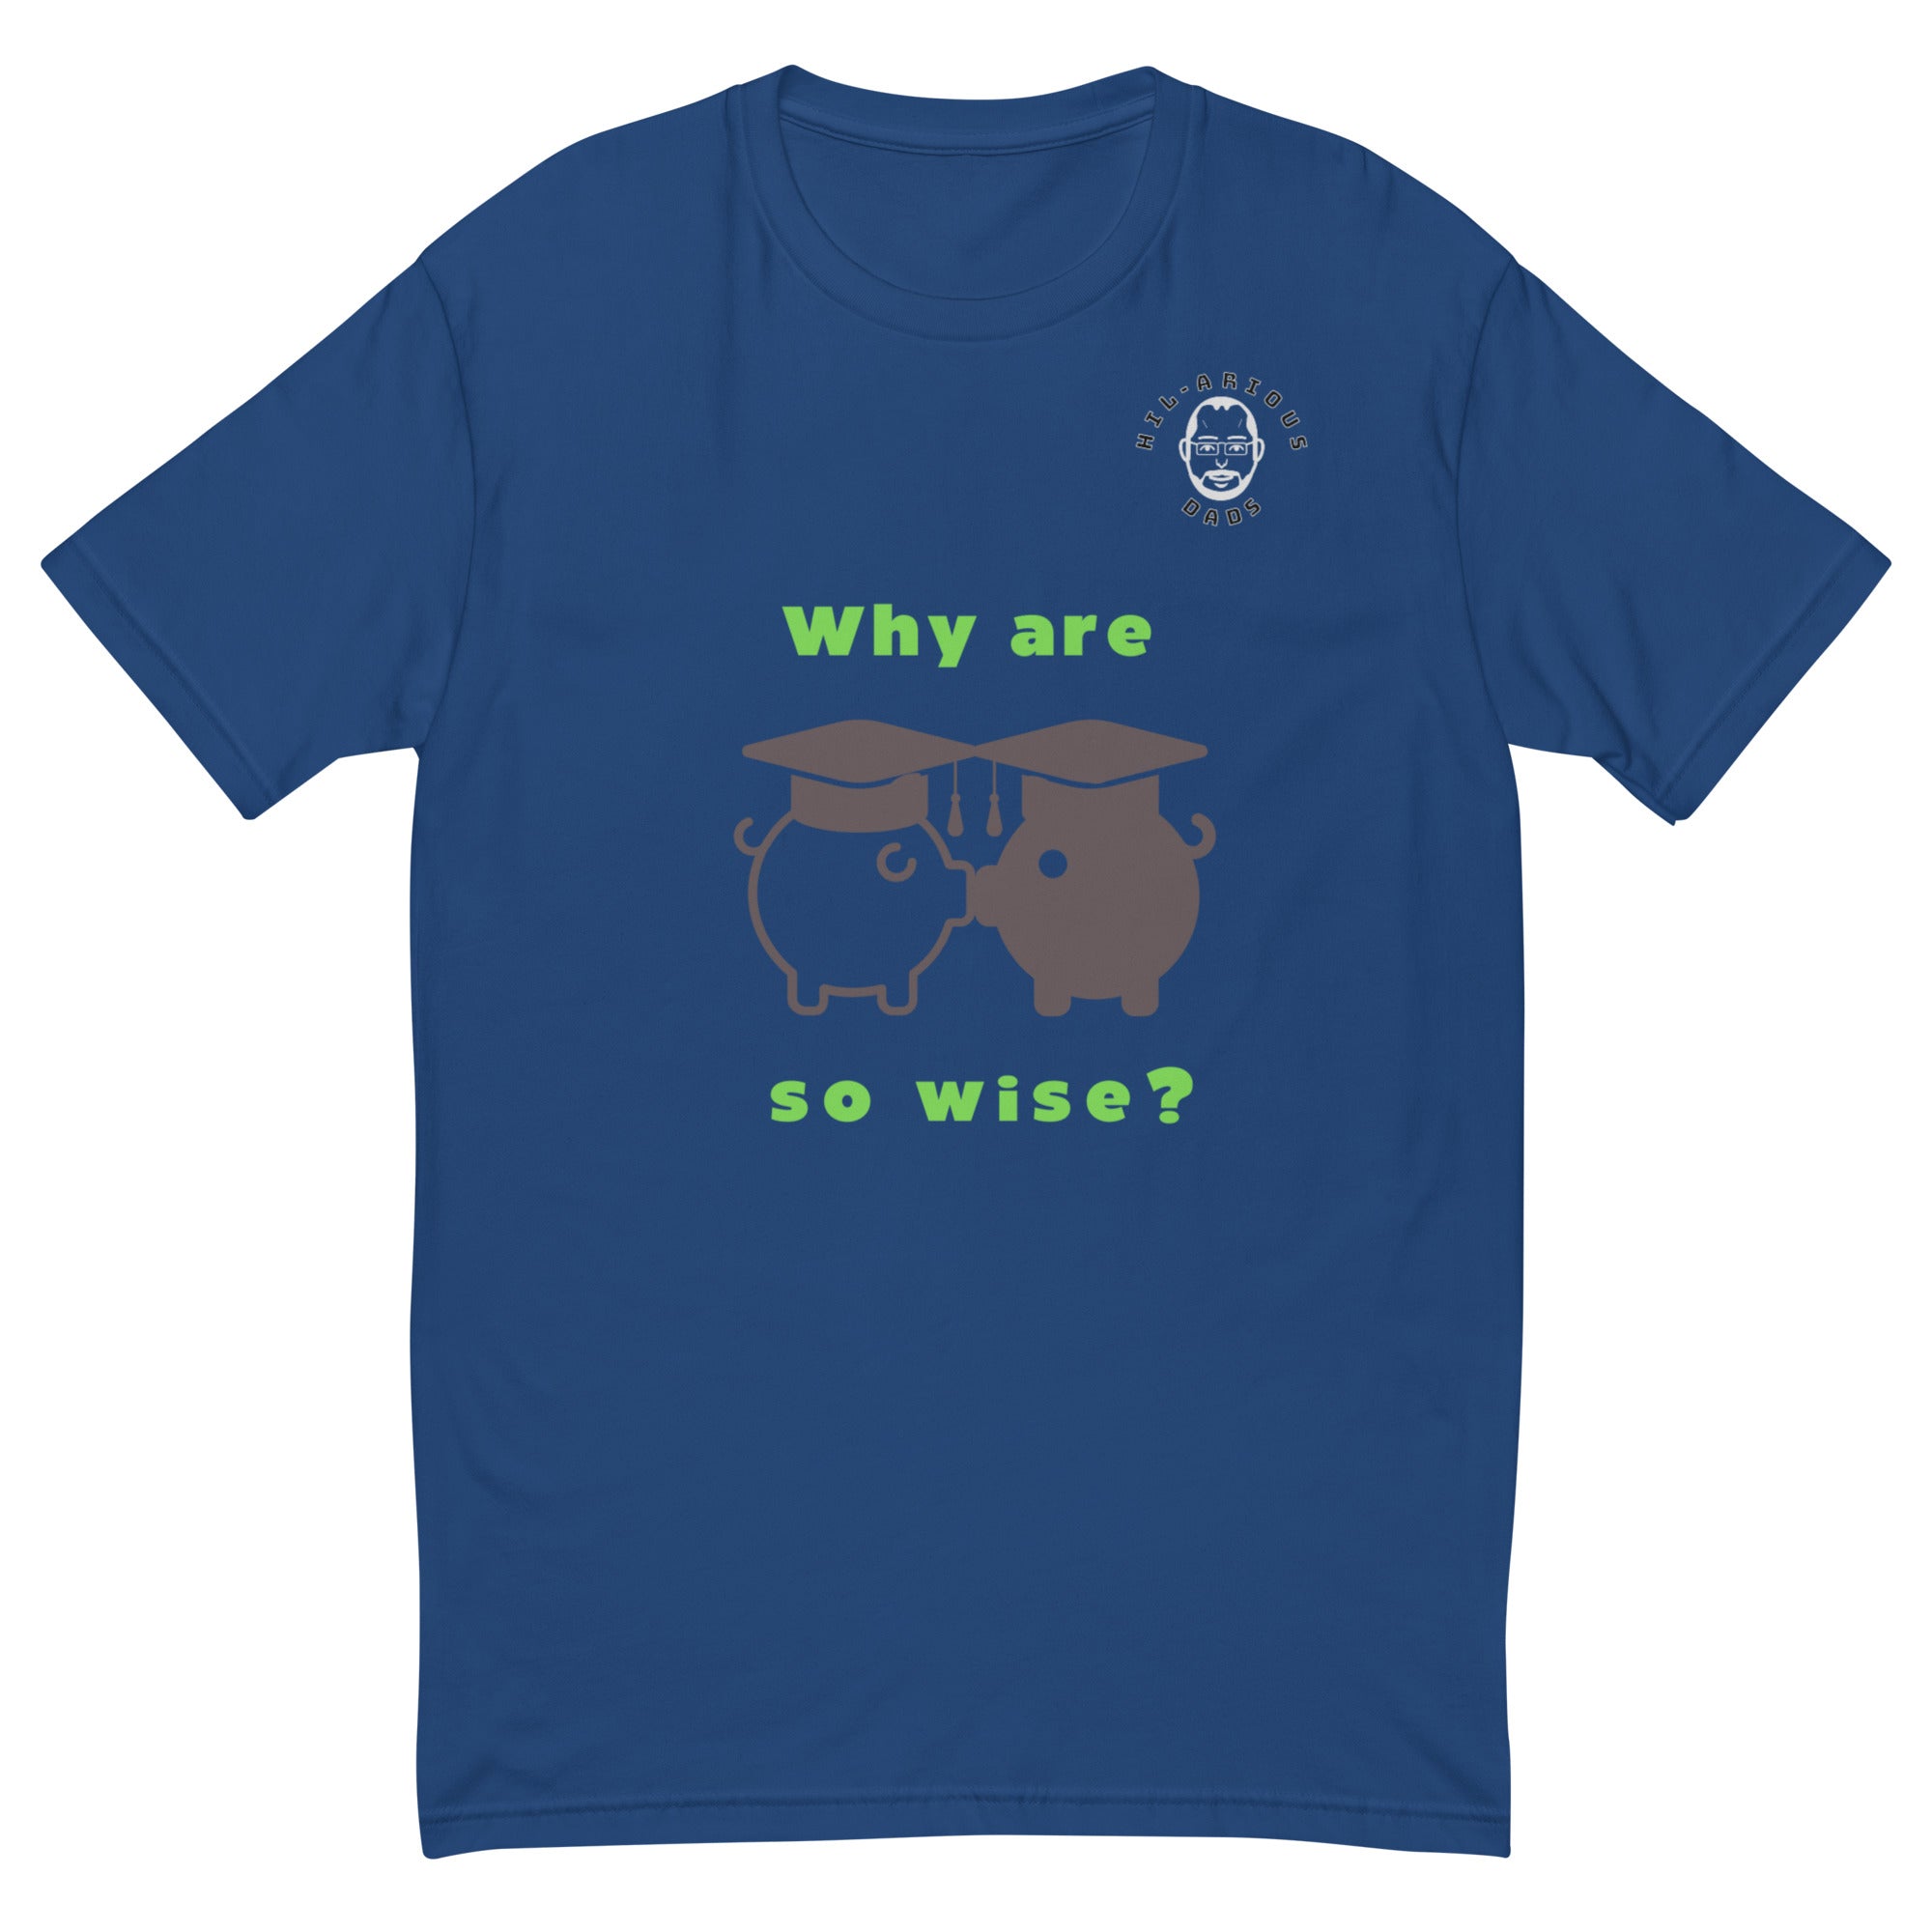 Why are Piggies so wise?-T-shirt - Hil-arious Dads